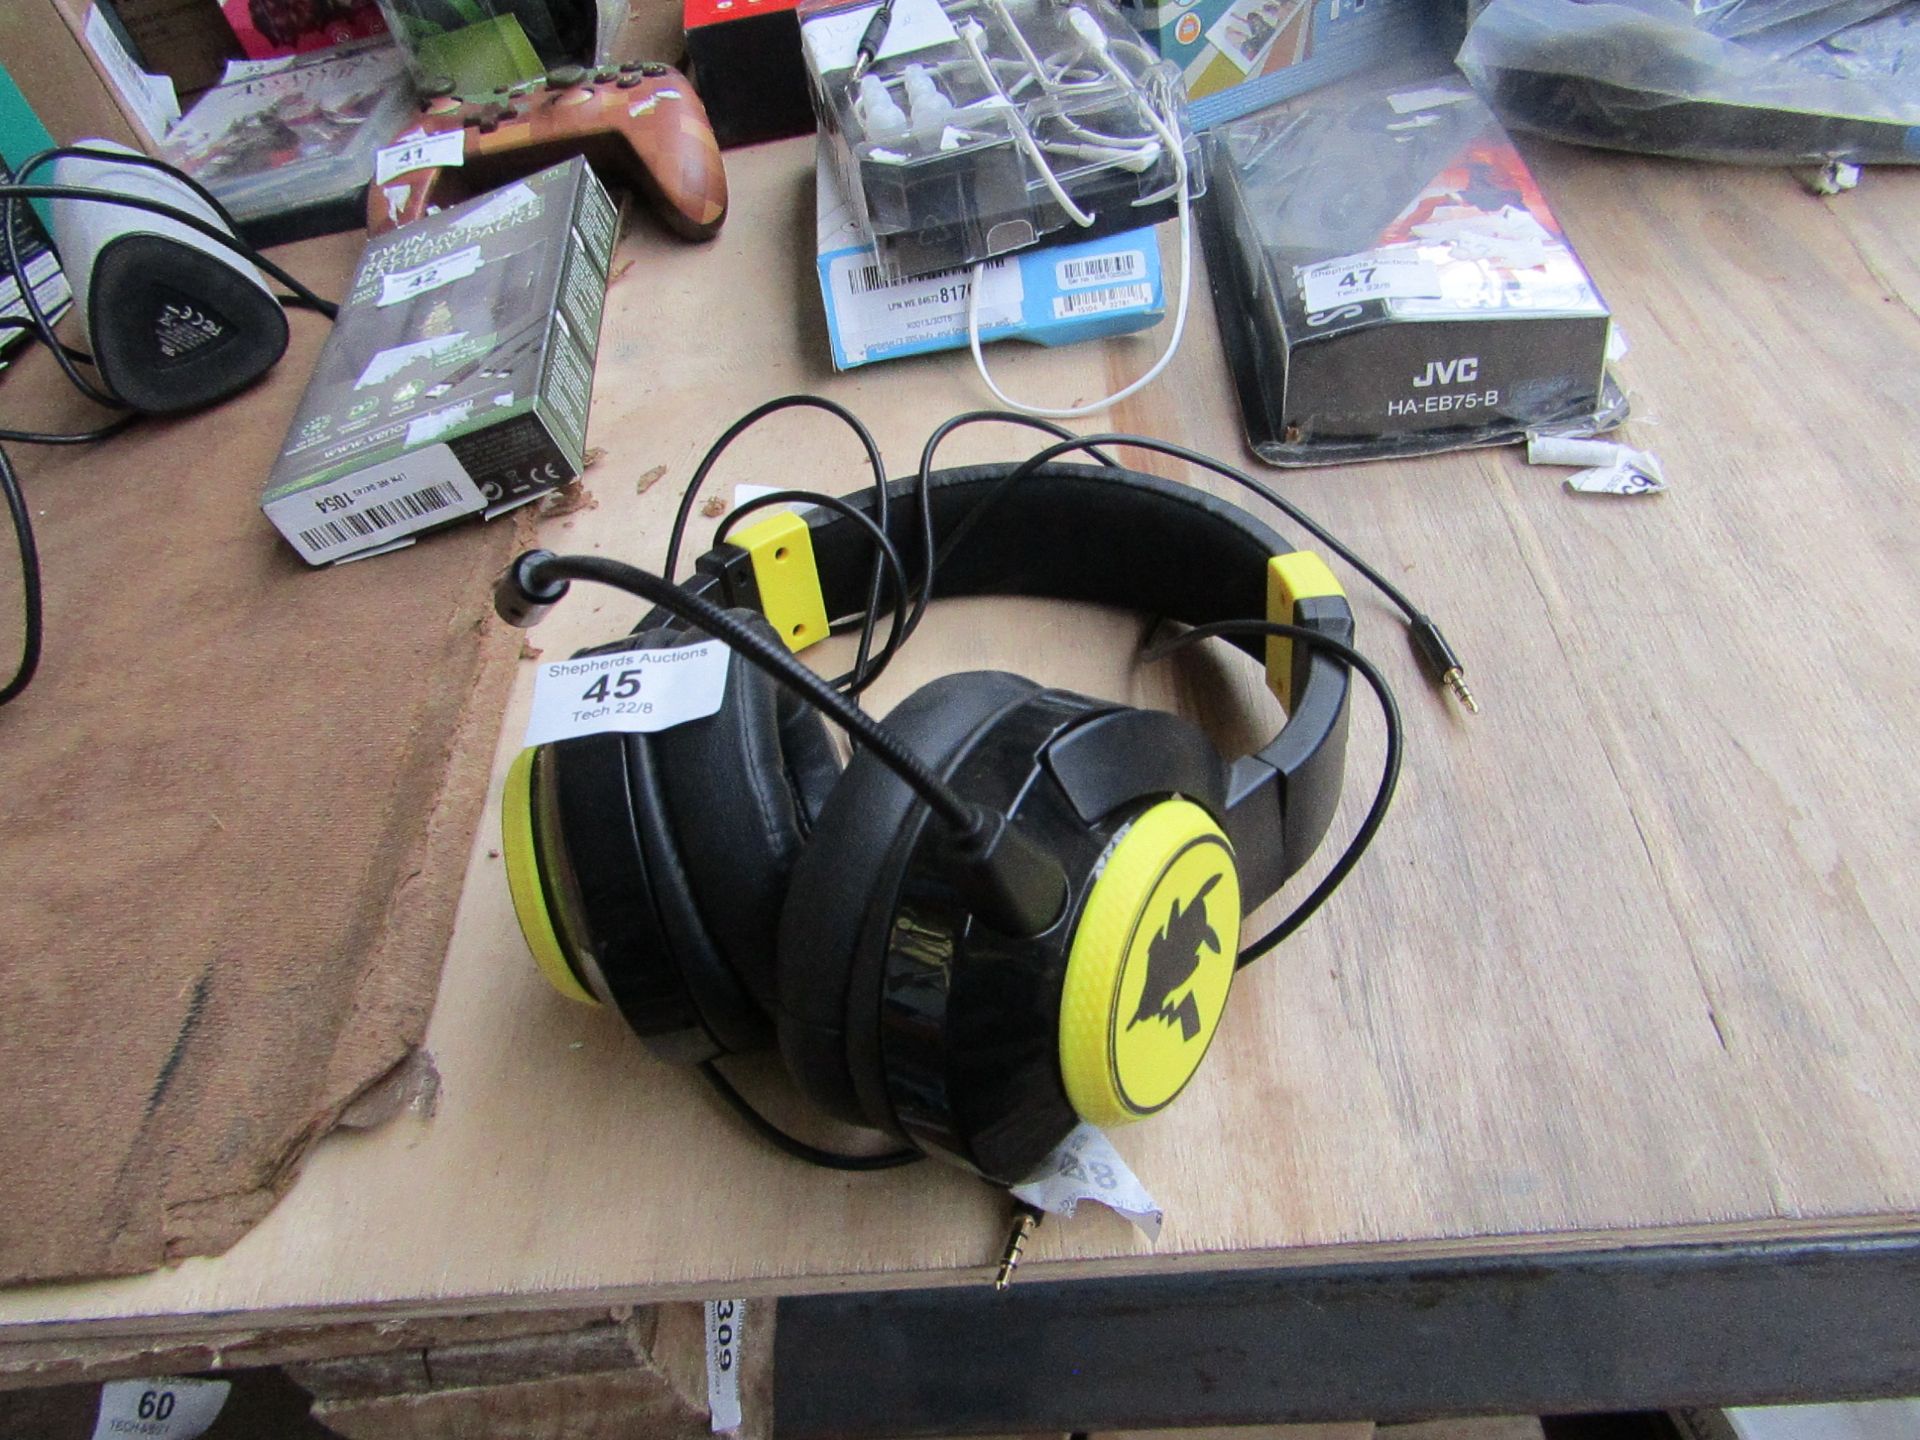 Wired Gaming Headset with Pikachu Design - Unchecked & Unboxed